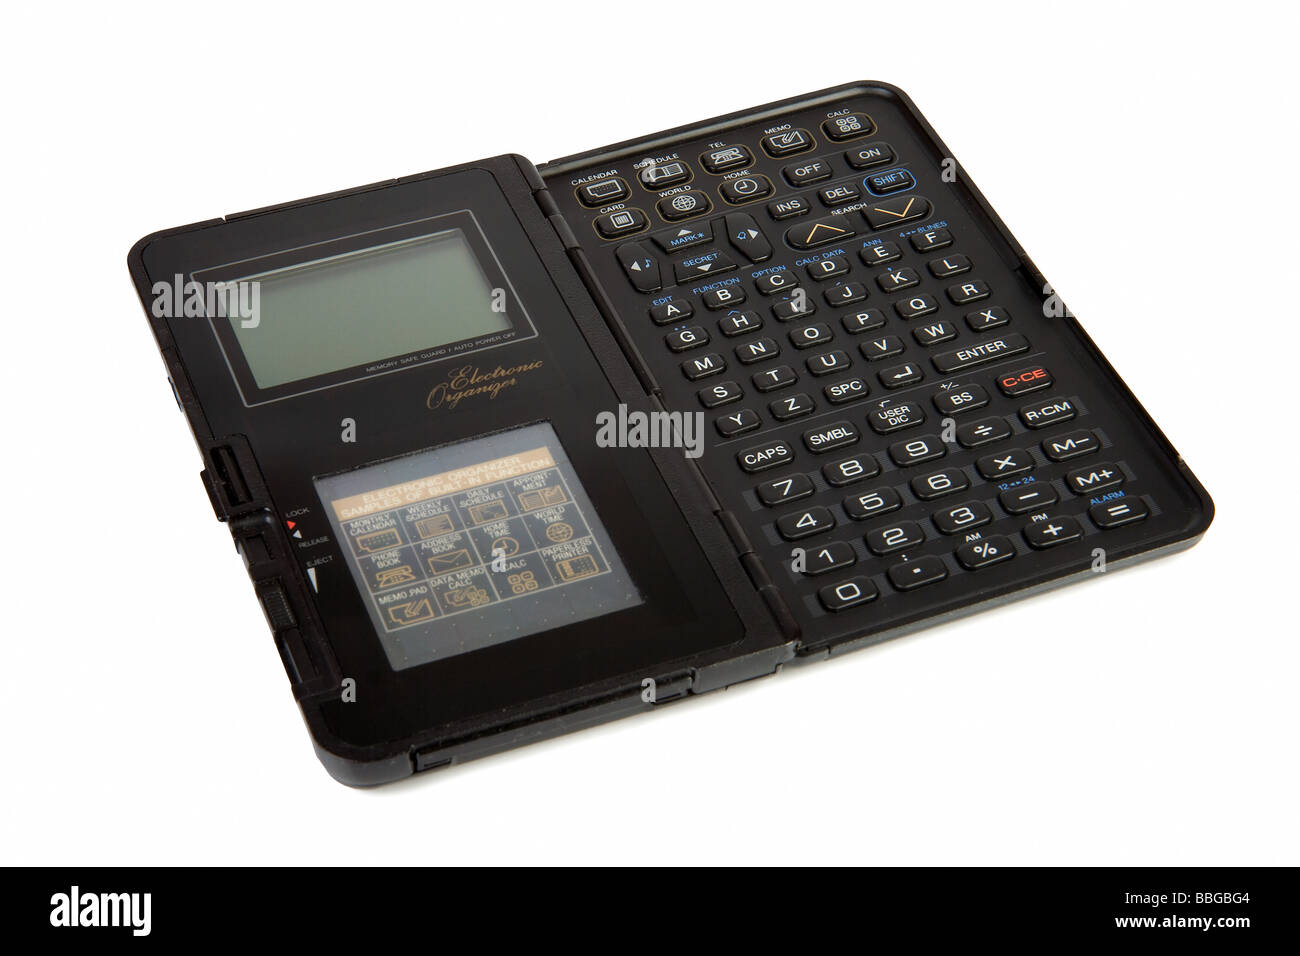 Old style personal electronic organizer Isolate on white Stock Photo